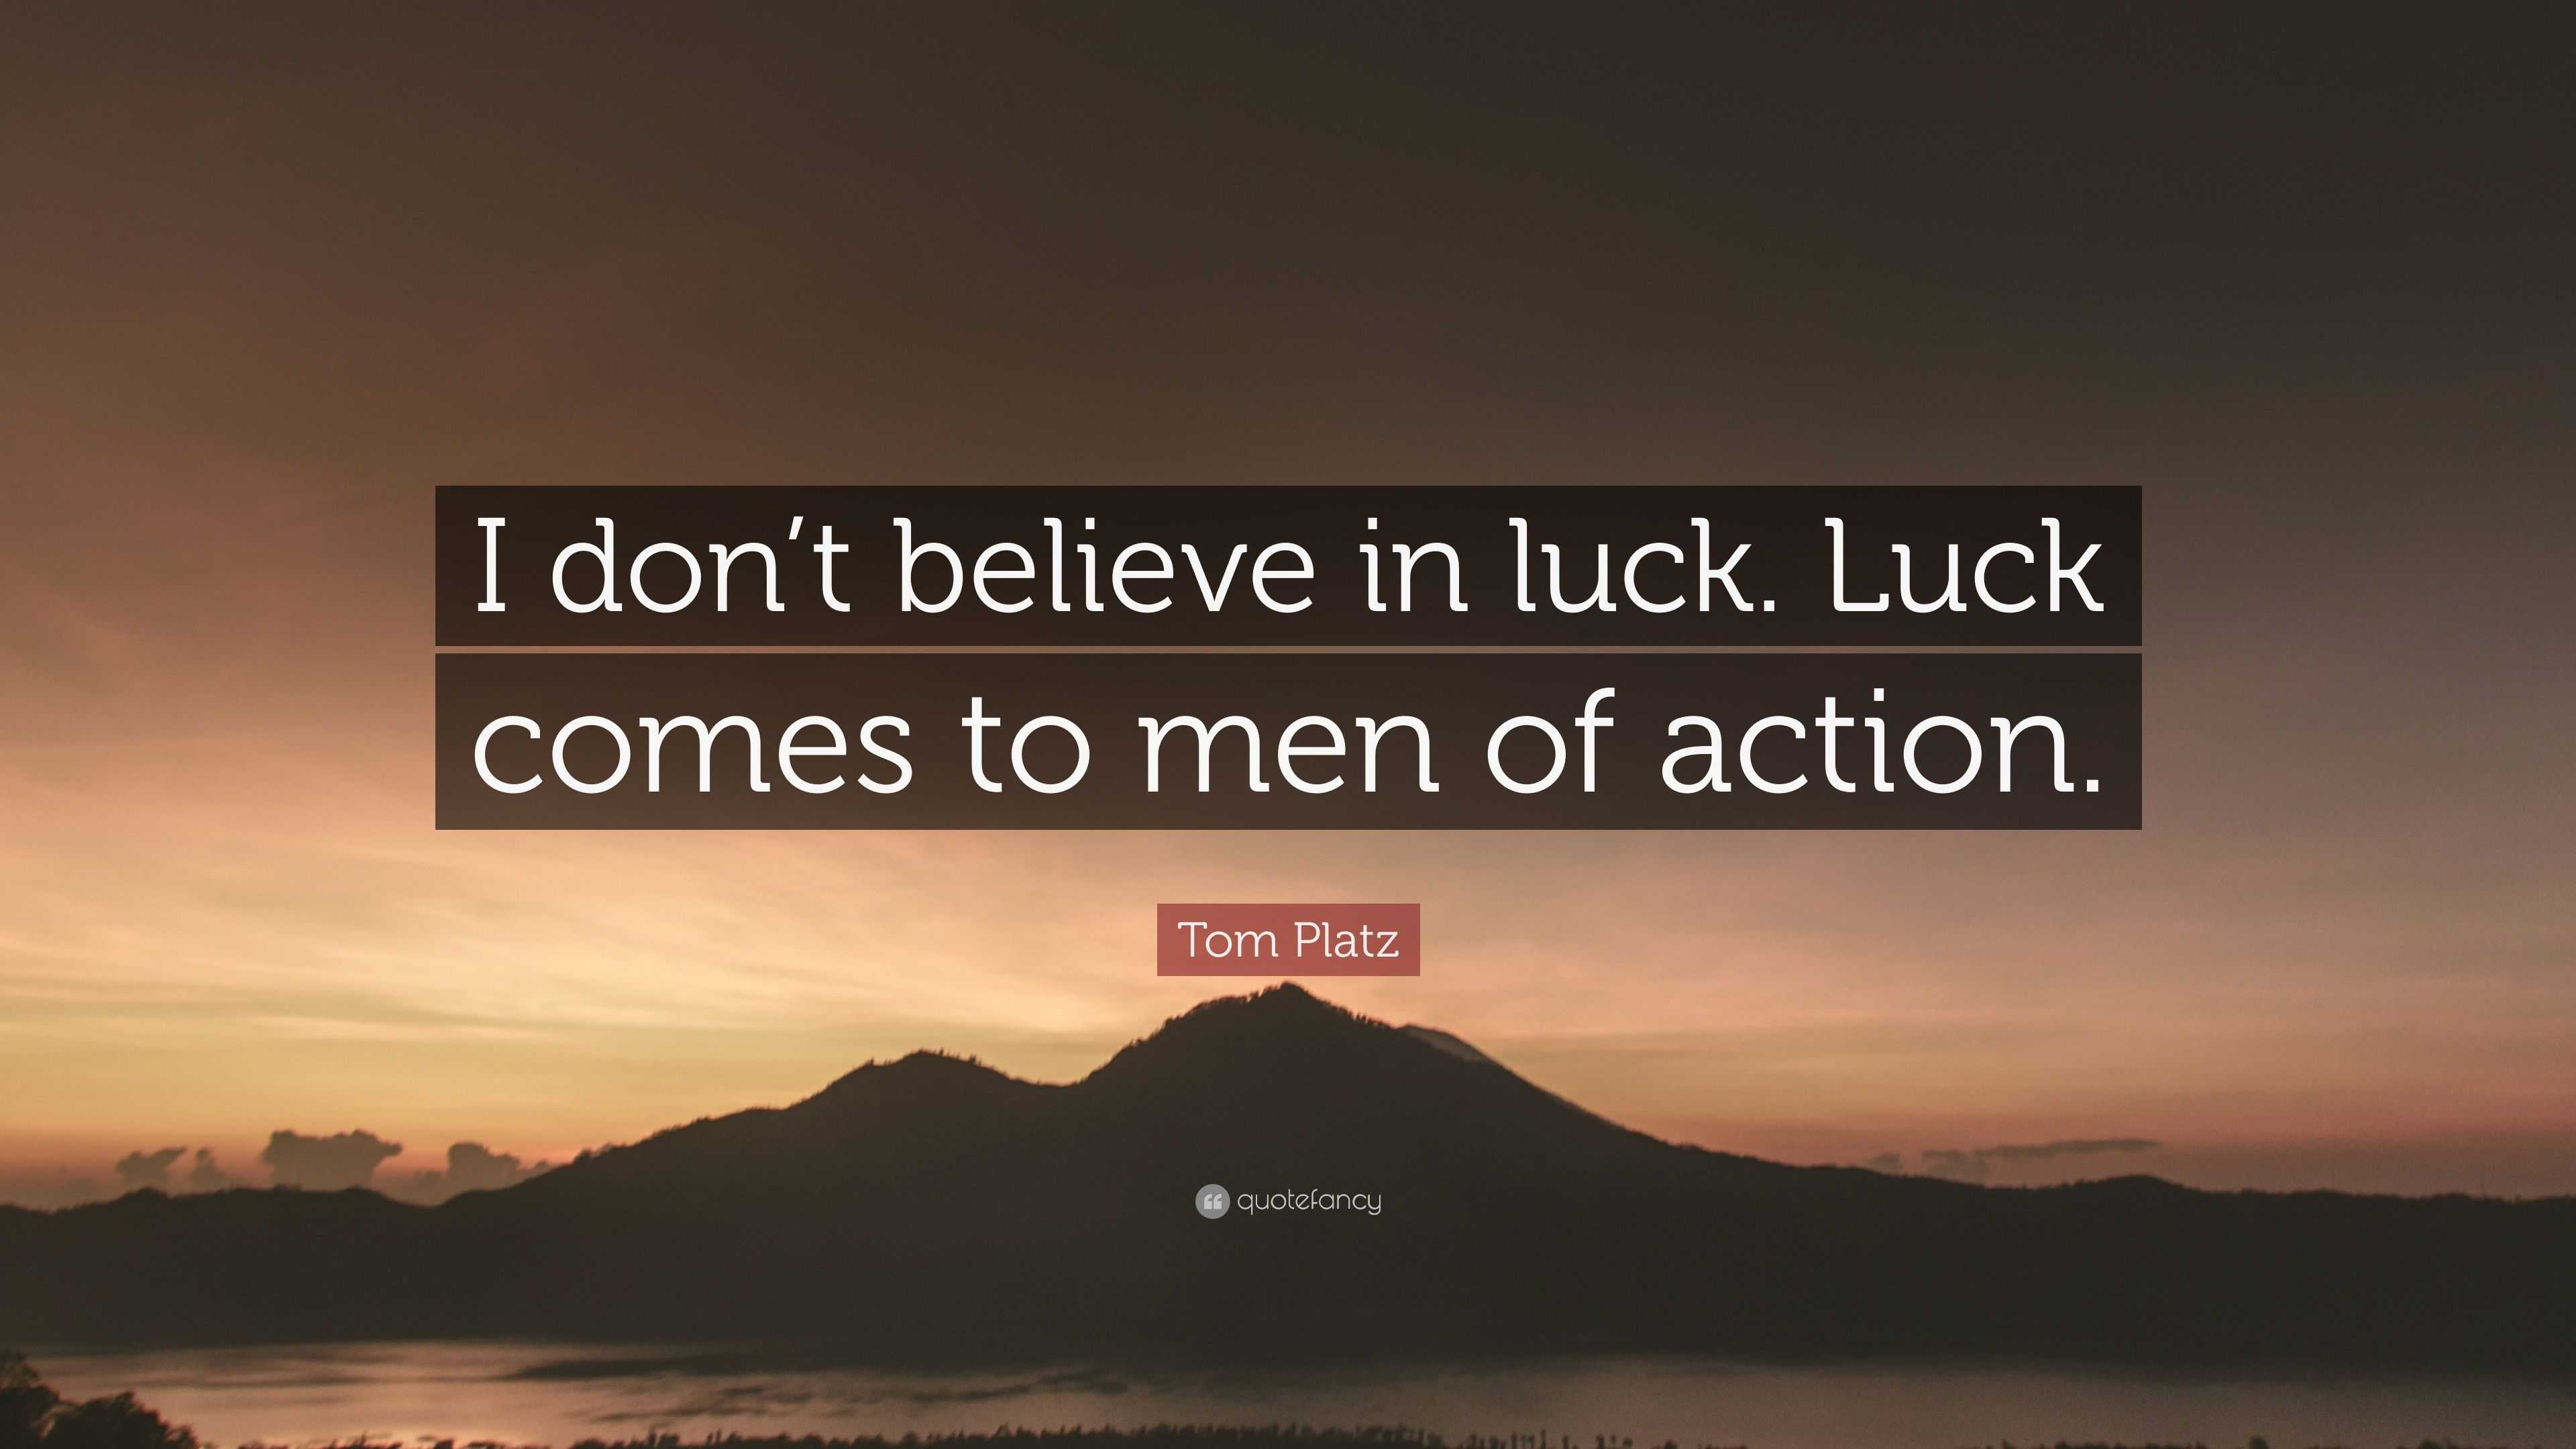 Tom Platz Quote: “I Don’t Believe In Luck. Luck Comes To Men Of Action.”